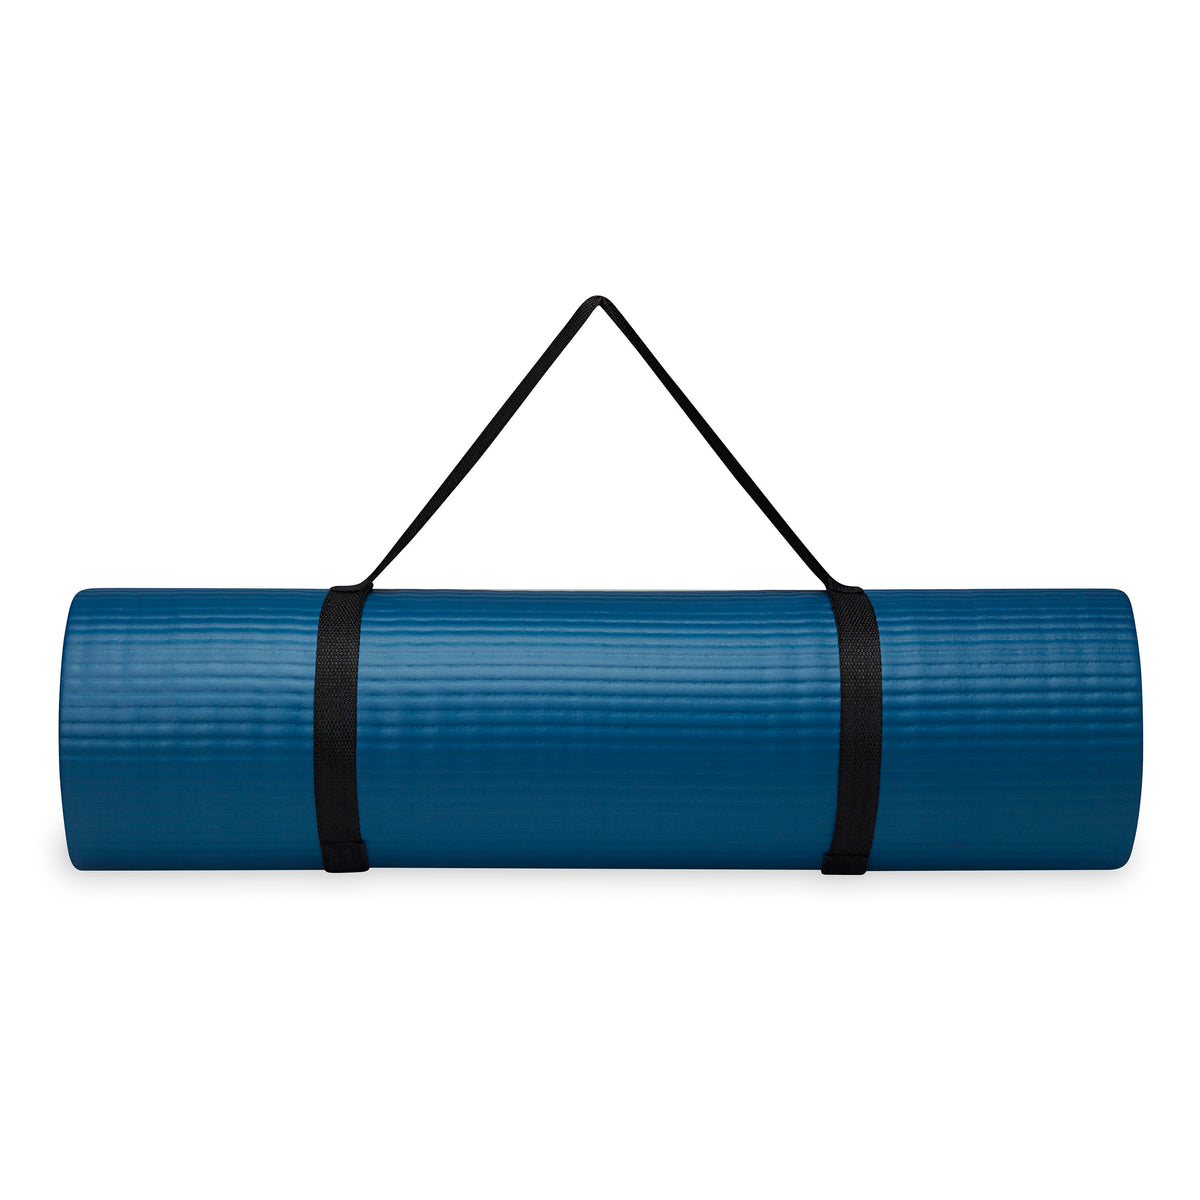 Gaiam Essentials Thick Yoga Mat Fitness & Exercise Mat with Easy